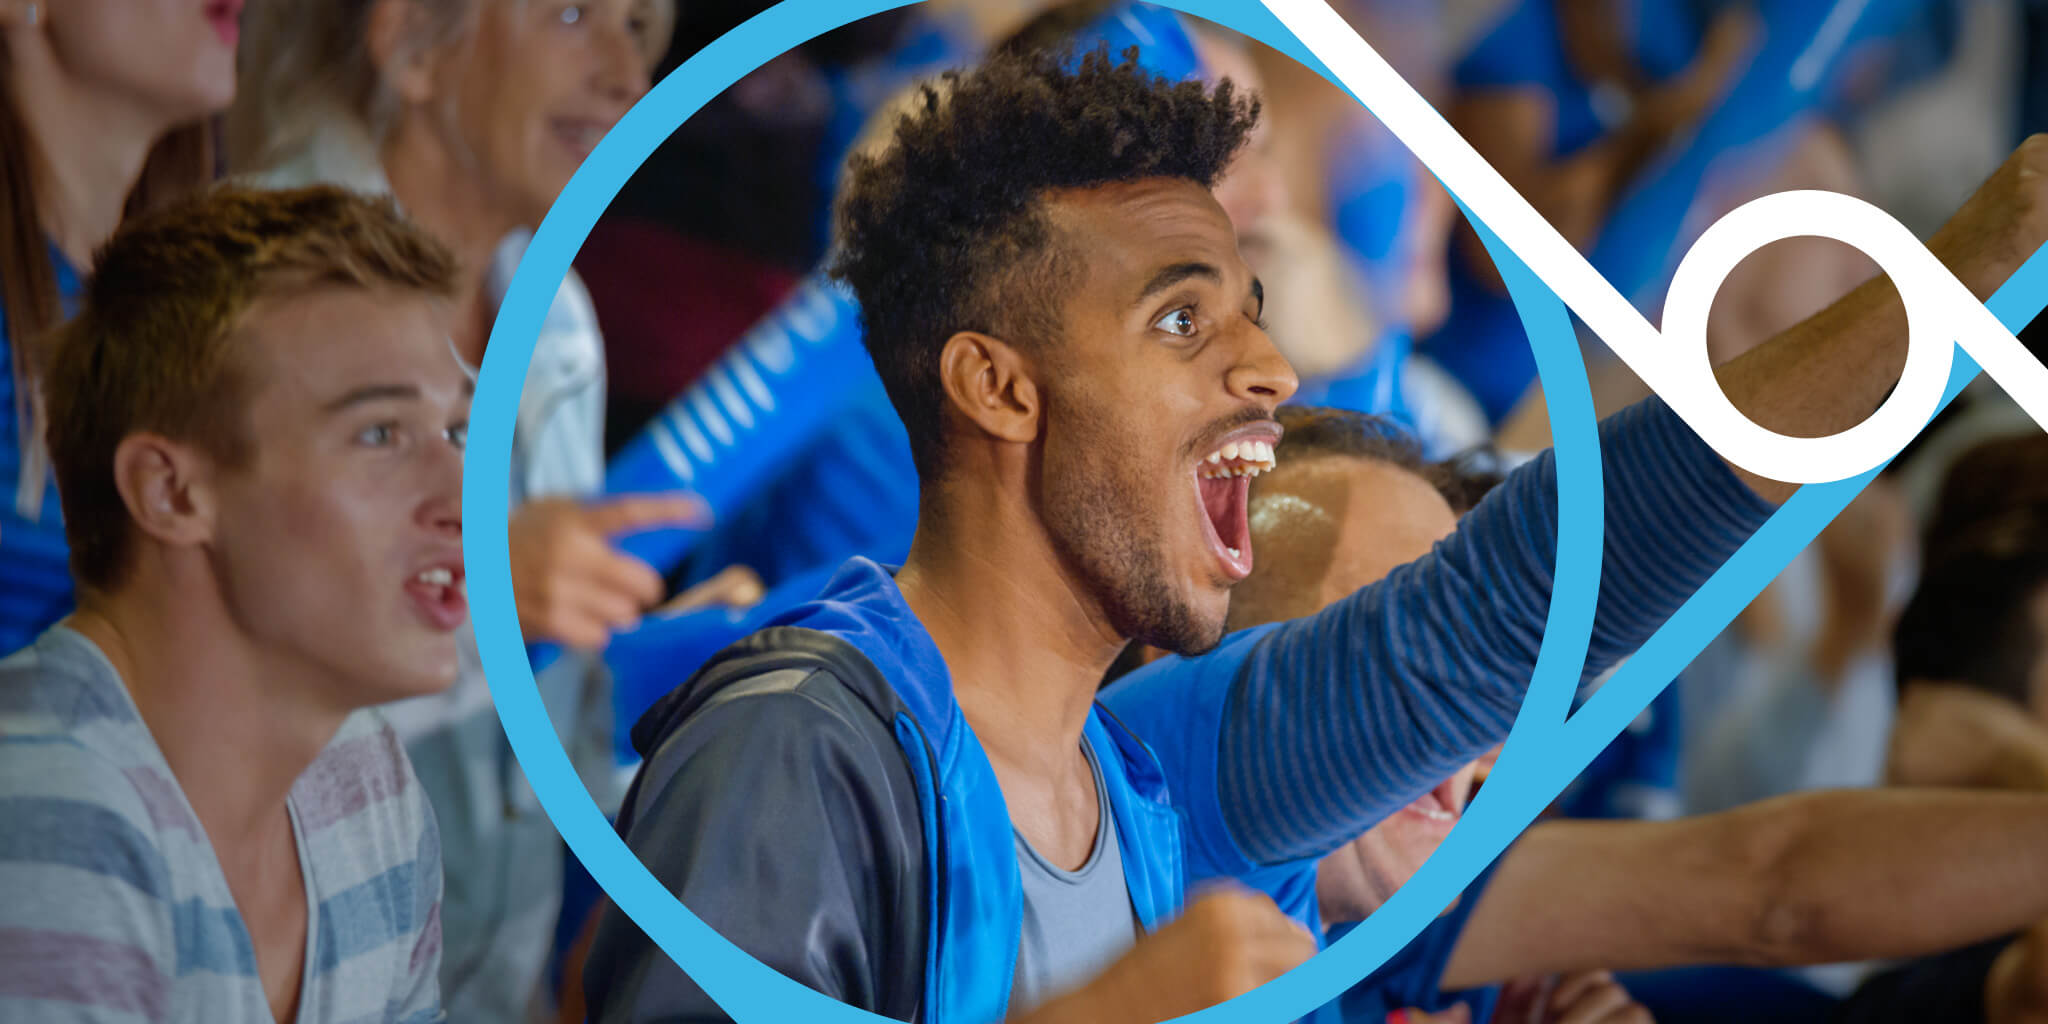 We sat down with MarketCast's Aaron Thomas and T-Mobile's Marie Woods to discuss how brands can engage & nurture the next generation of fans with sports fandom.